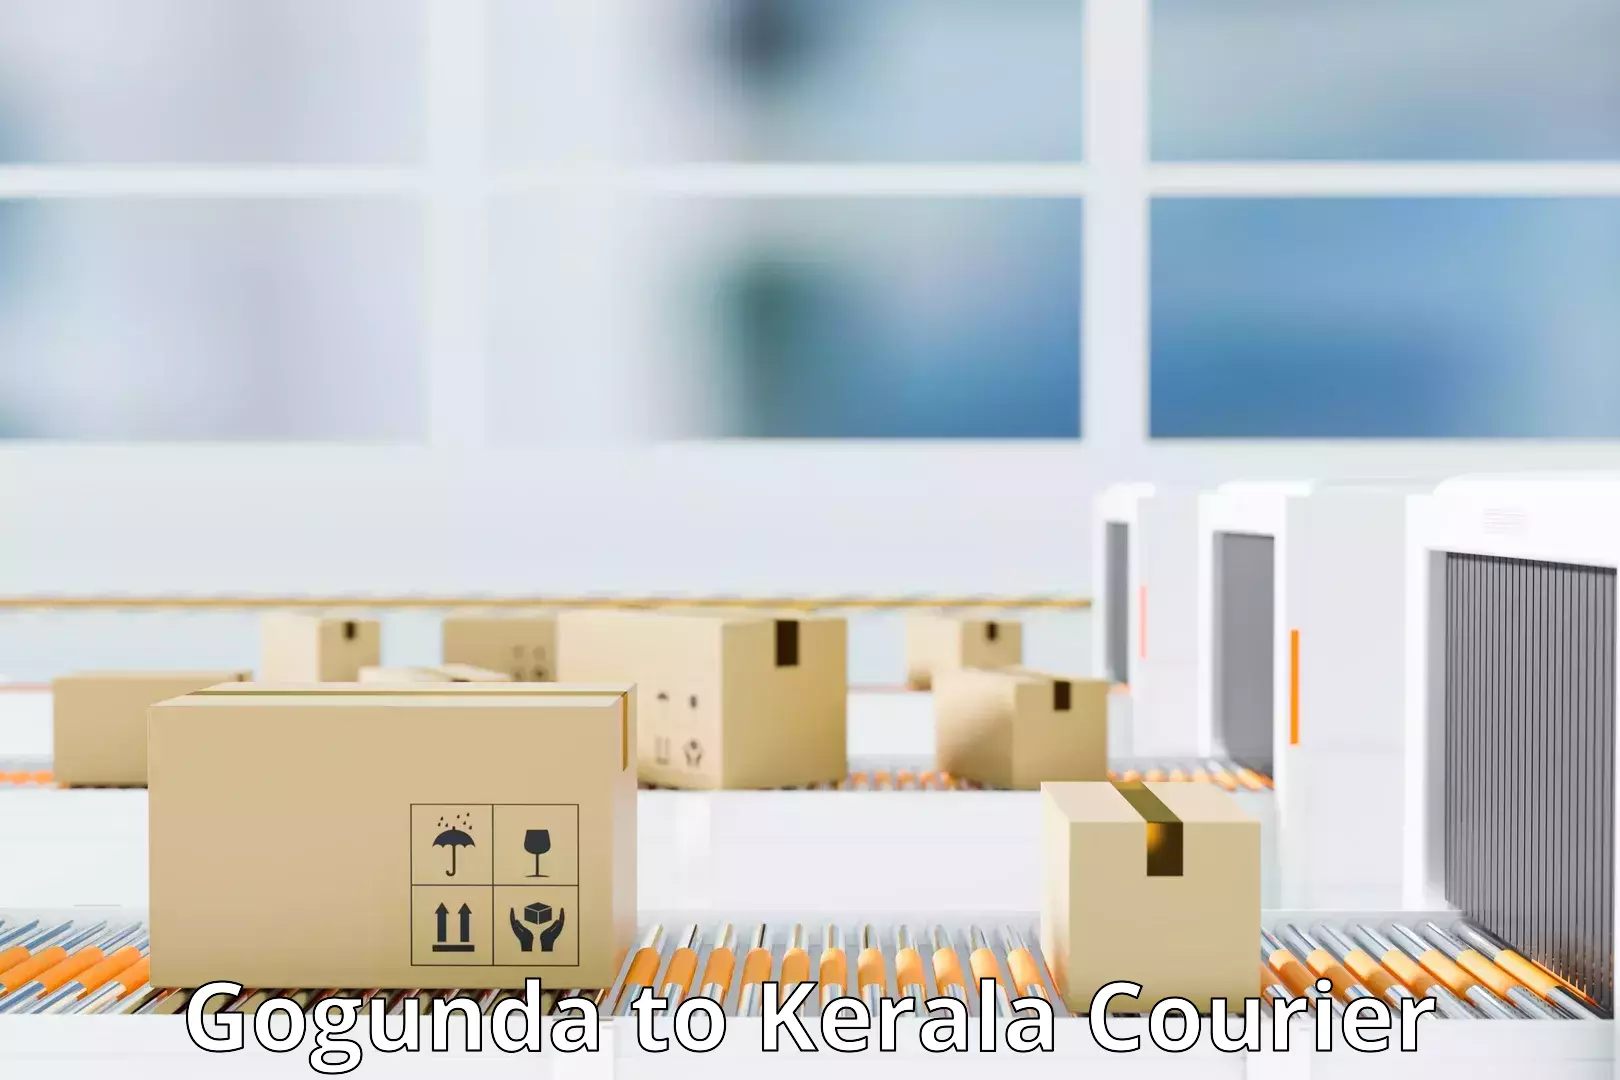 Reliable delivery network Gogunda to Kerala